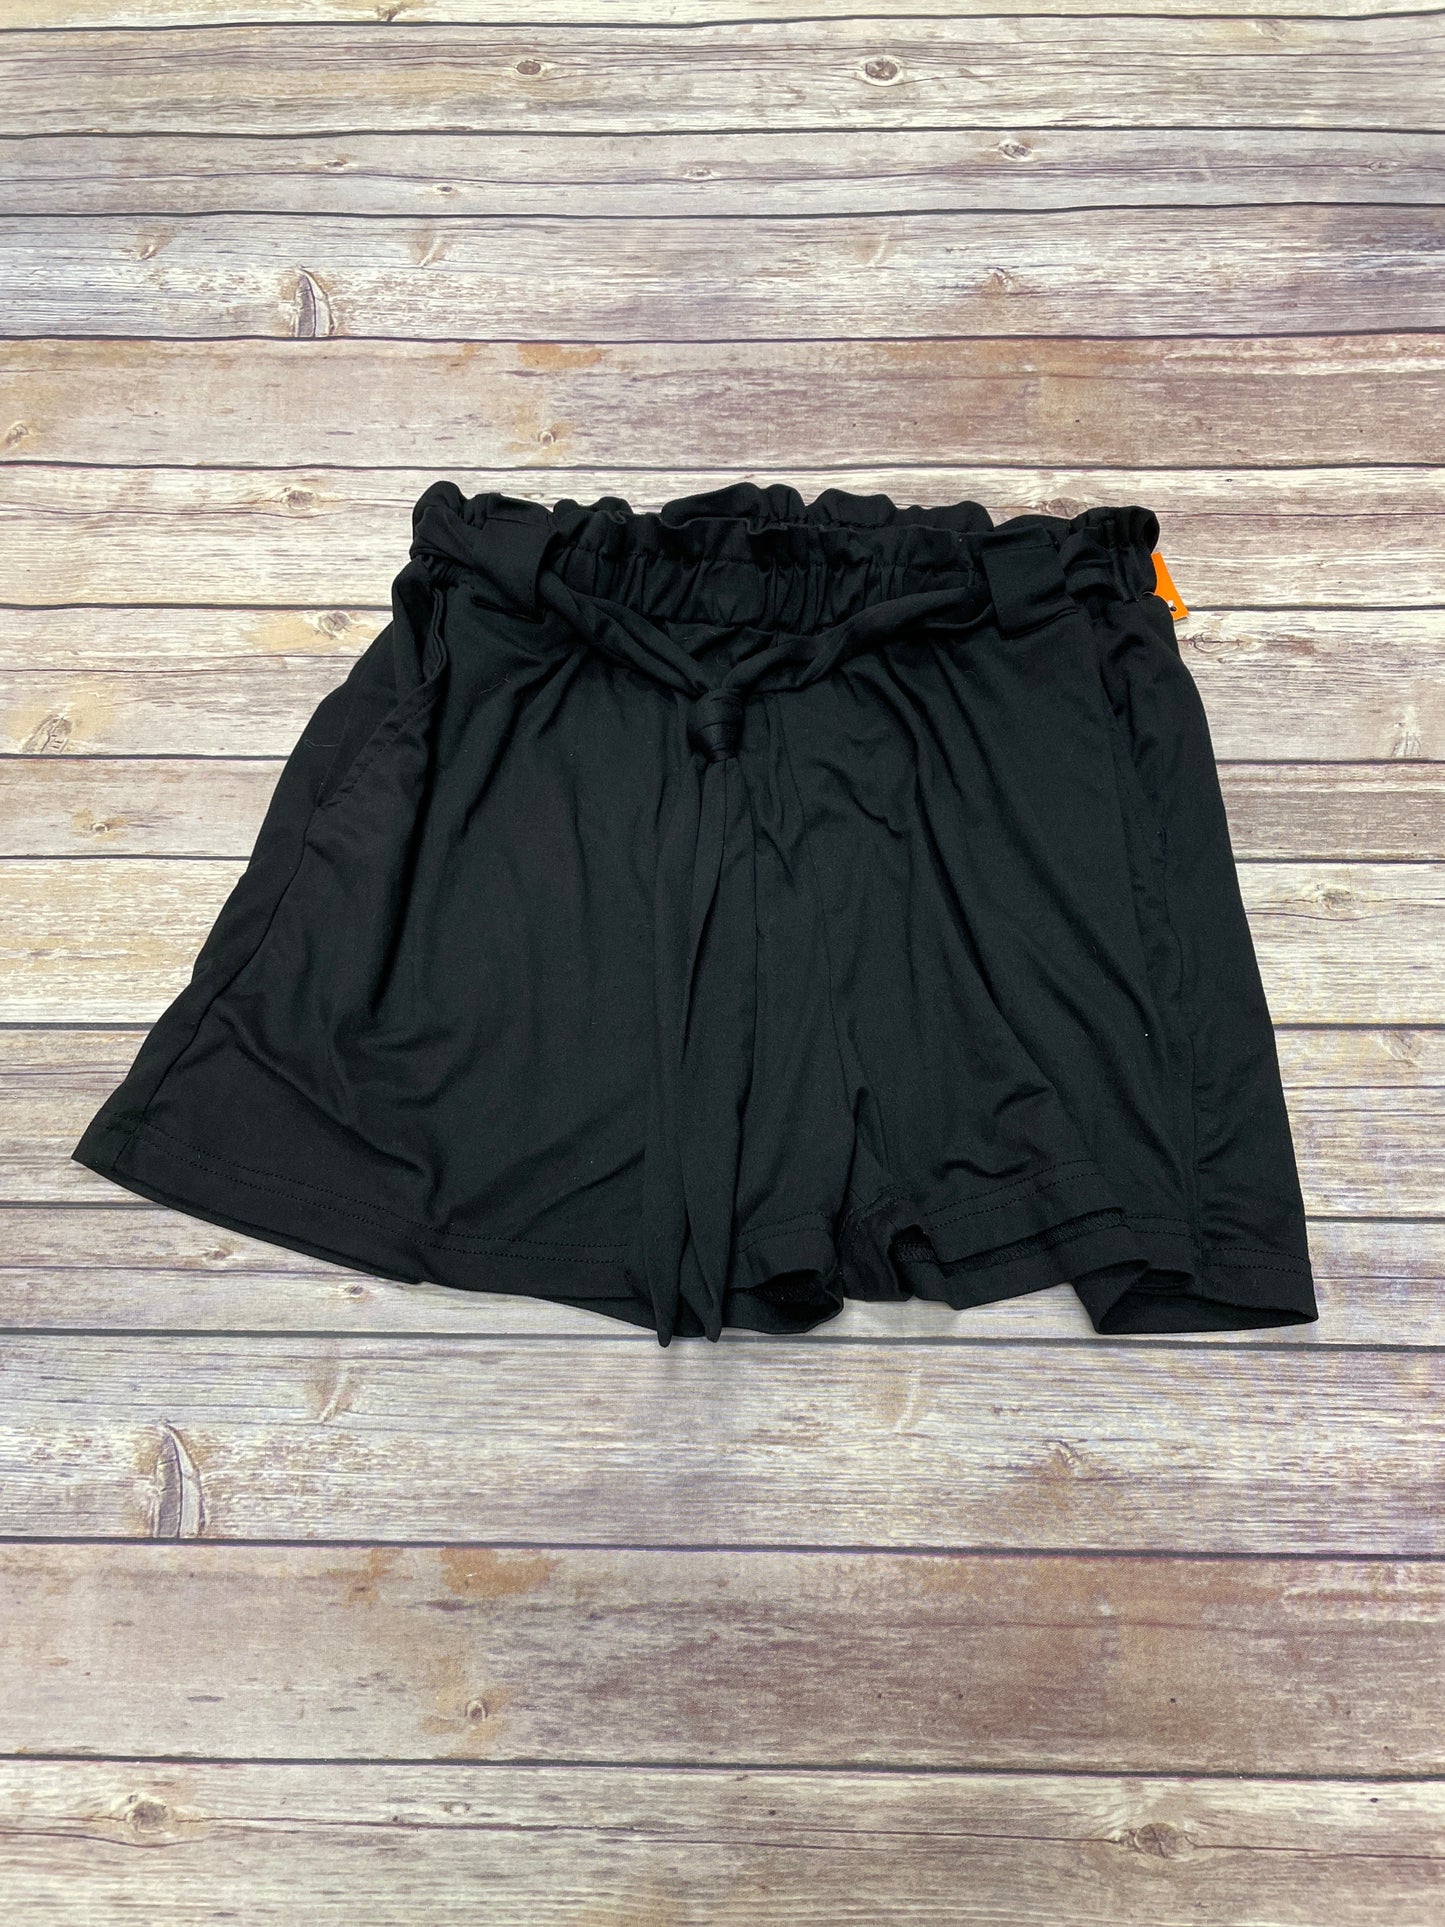 Shorts By Cme  Size: L